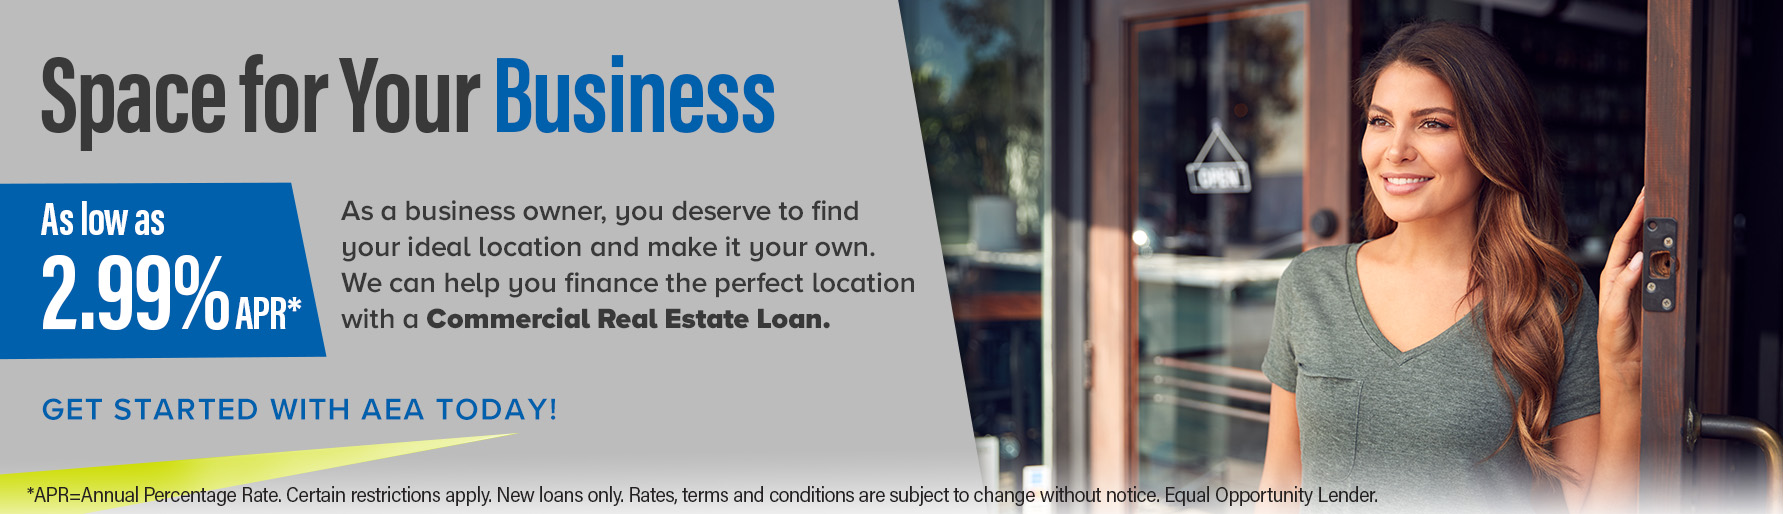 Commercial real estate loans advertisement